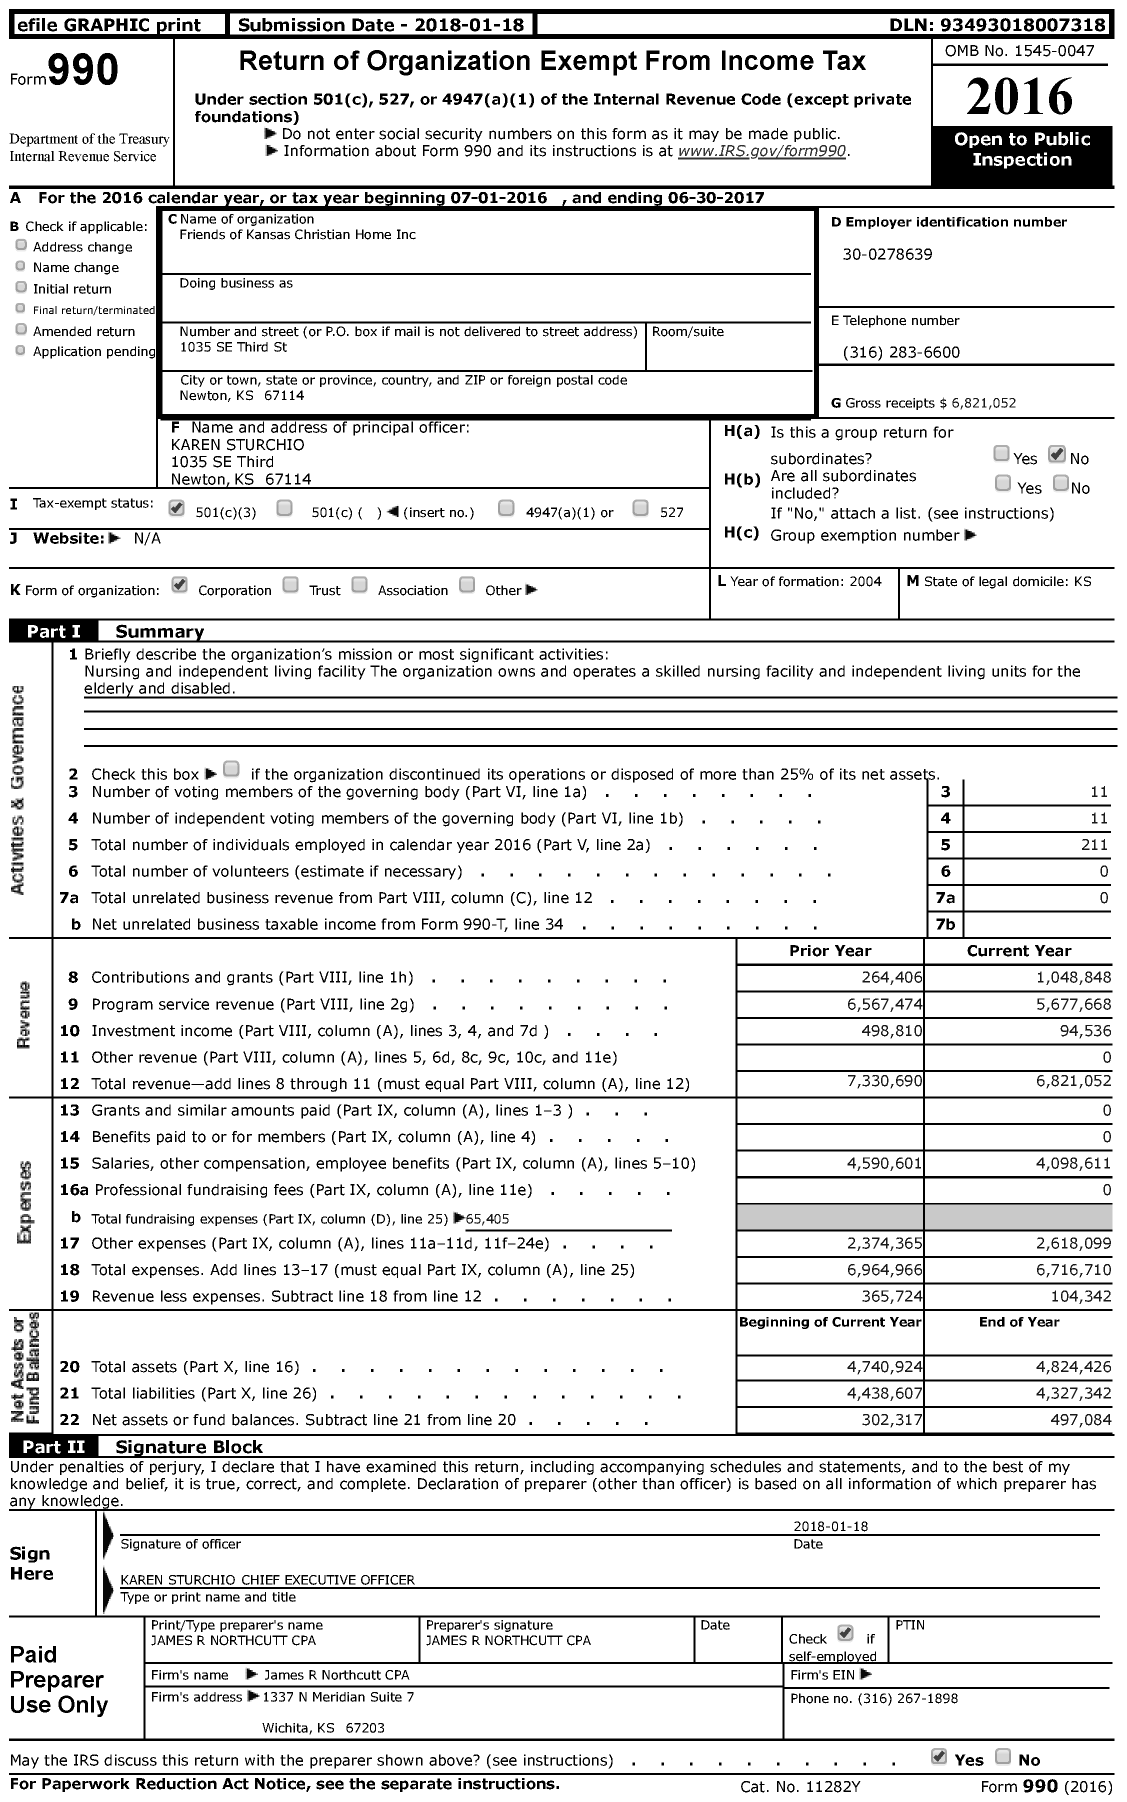 Image of first page of 2016 Form 990 for Kansas Christian Home (KCH)